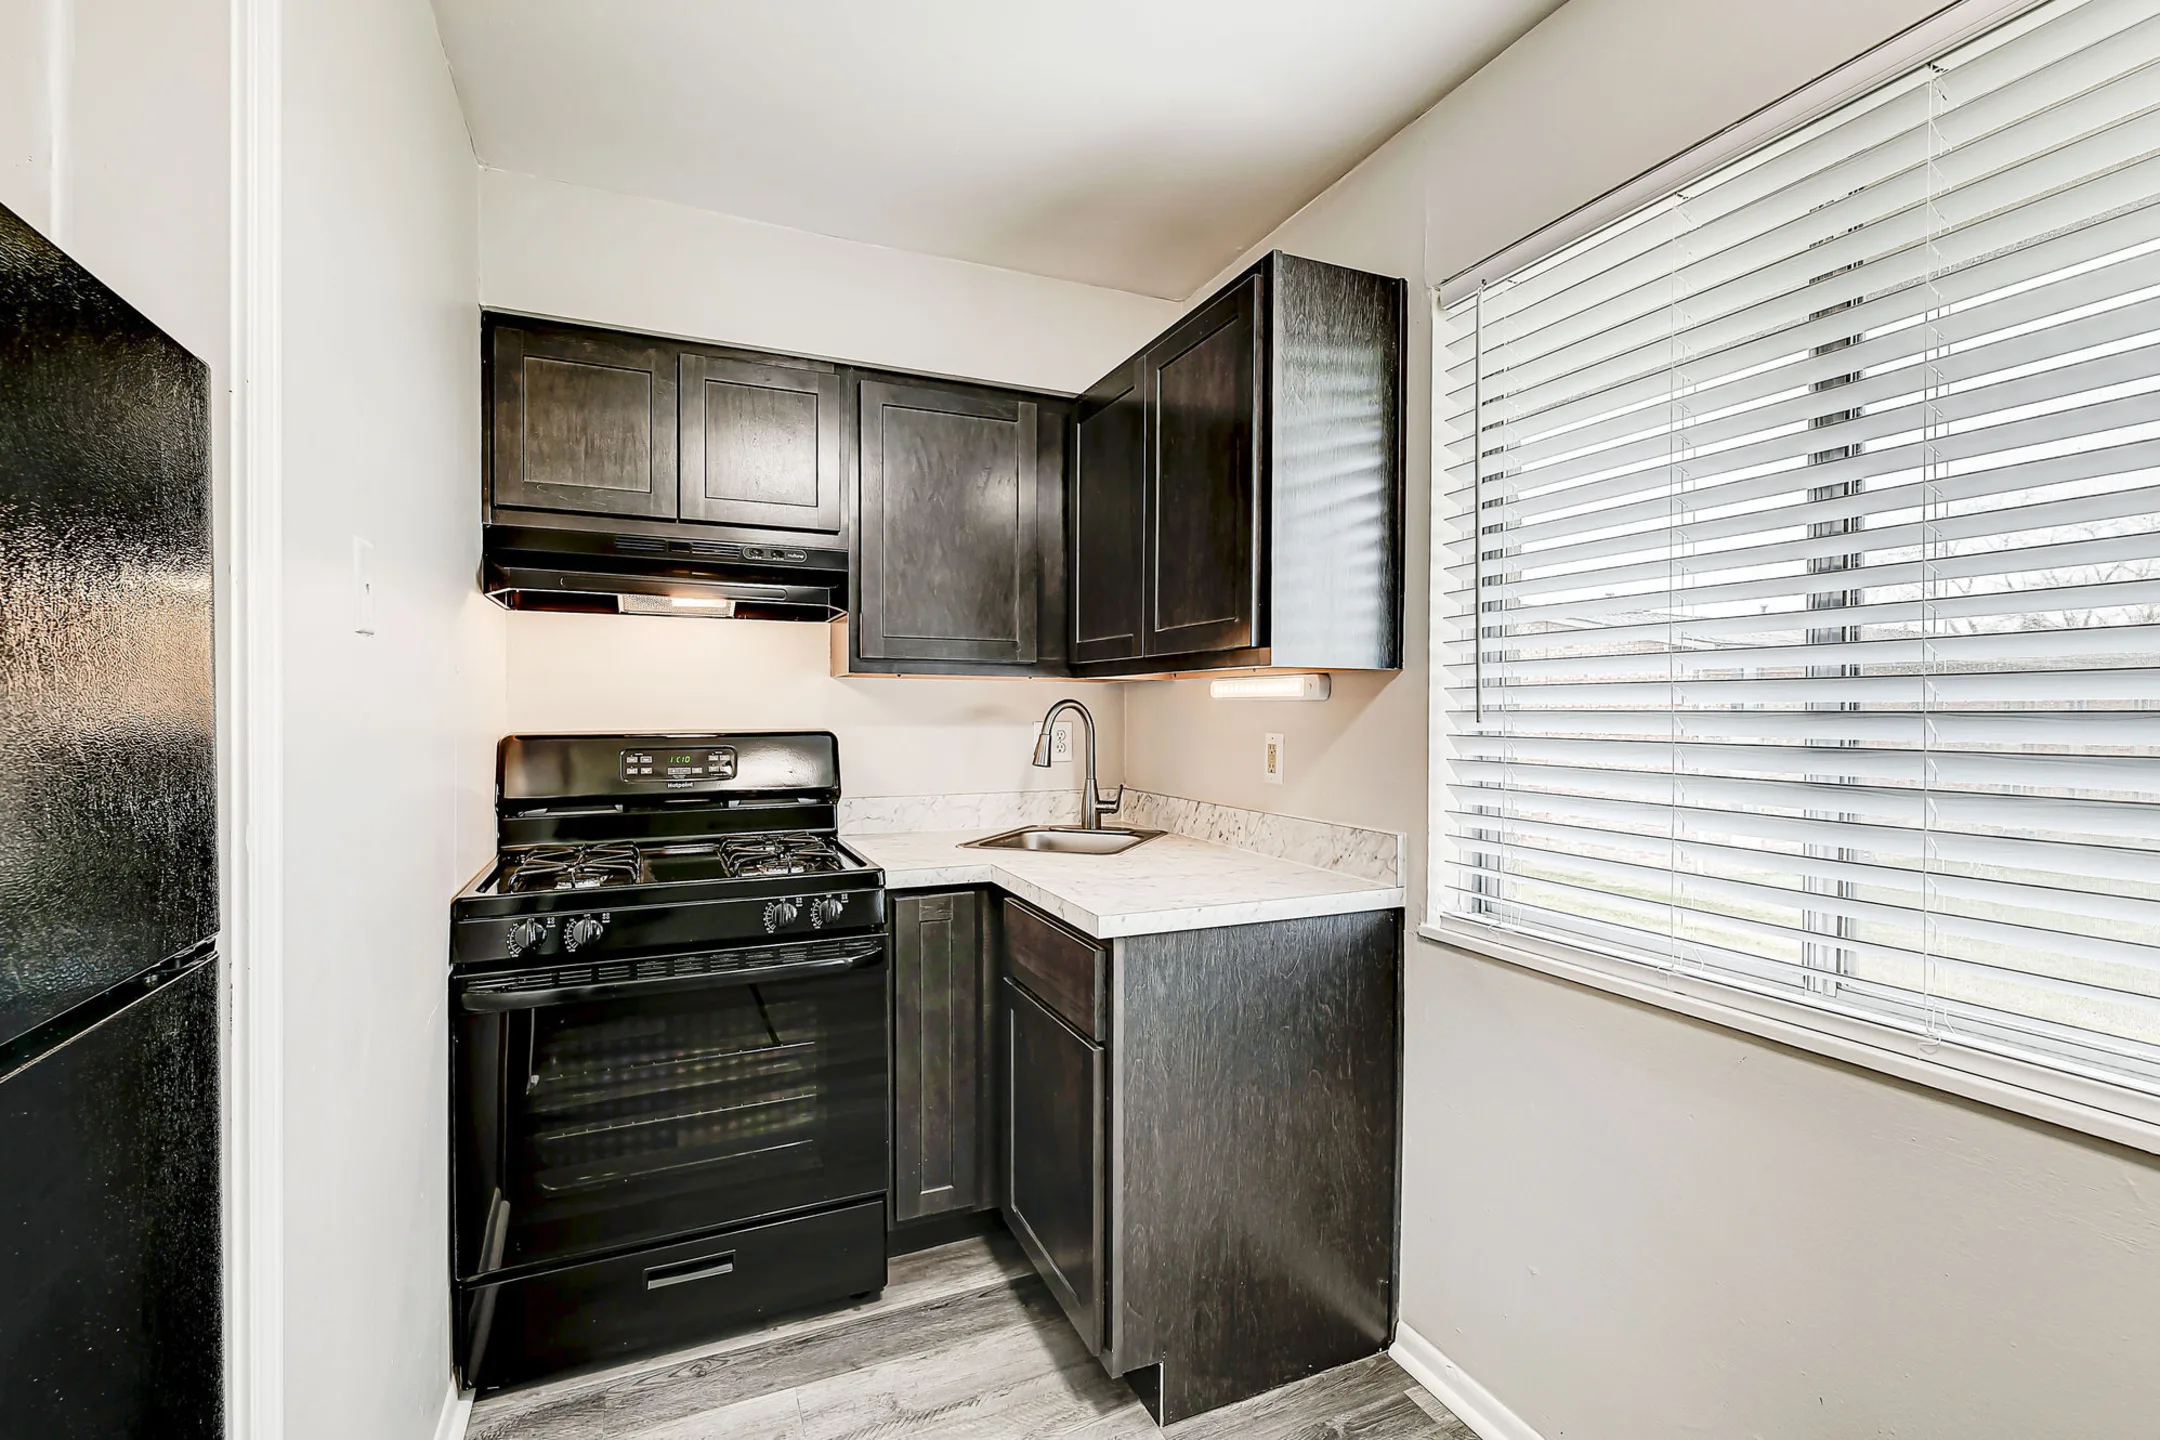 Kitchen - Ninth Ave Apartments - Indianapolis, IN